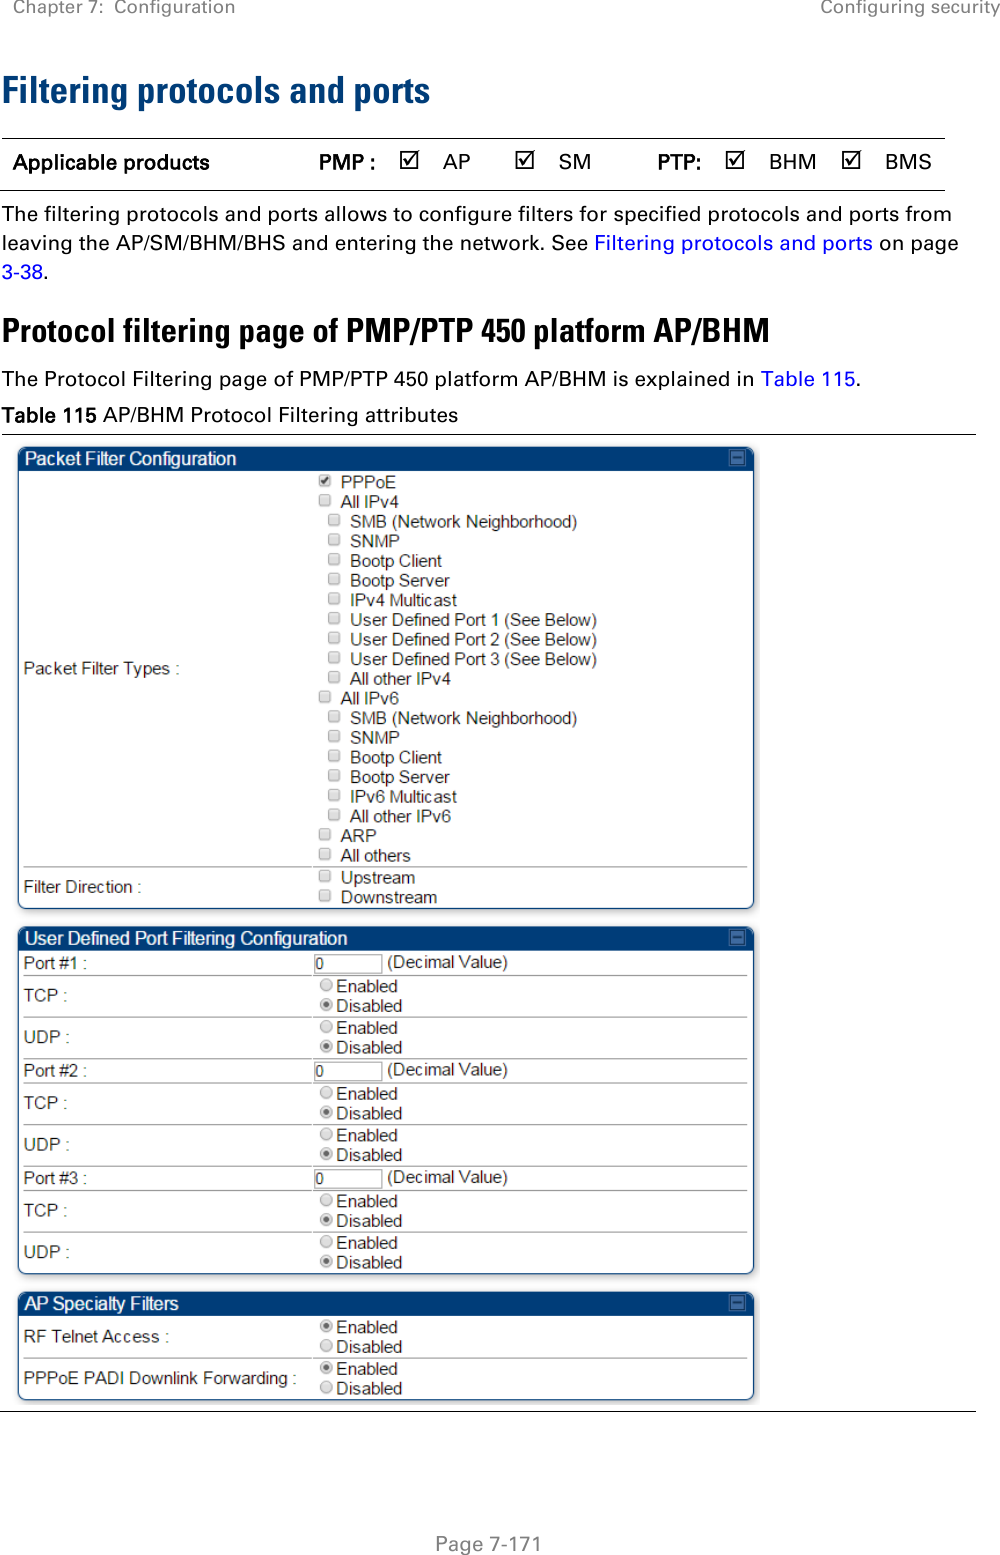 Chapter 7:  Configuration Configuring security   Page 7-171 Filtering protocols and ports Applicable products PMP :  AP  SM PTP:  BHM  BMS The filtering protocols and ports allows to configure filters for specified protocols and ports from leaving the AP/SM/BHM/BHS and entering the network. See Filtering protocols and ports on page 3-38. Protocol filtering page of PMP/PTP 450 platform AP/BHM The Protocol Filtering page of PMP/PTP 450 platform AP/BHM is explained in Table 115. Table 115 AP/BHM Protocol Filtering attributes  